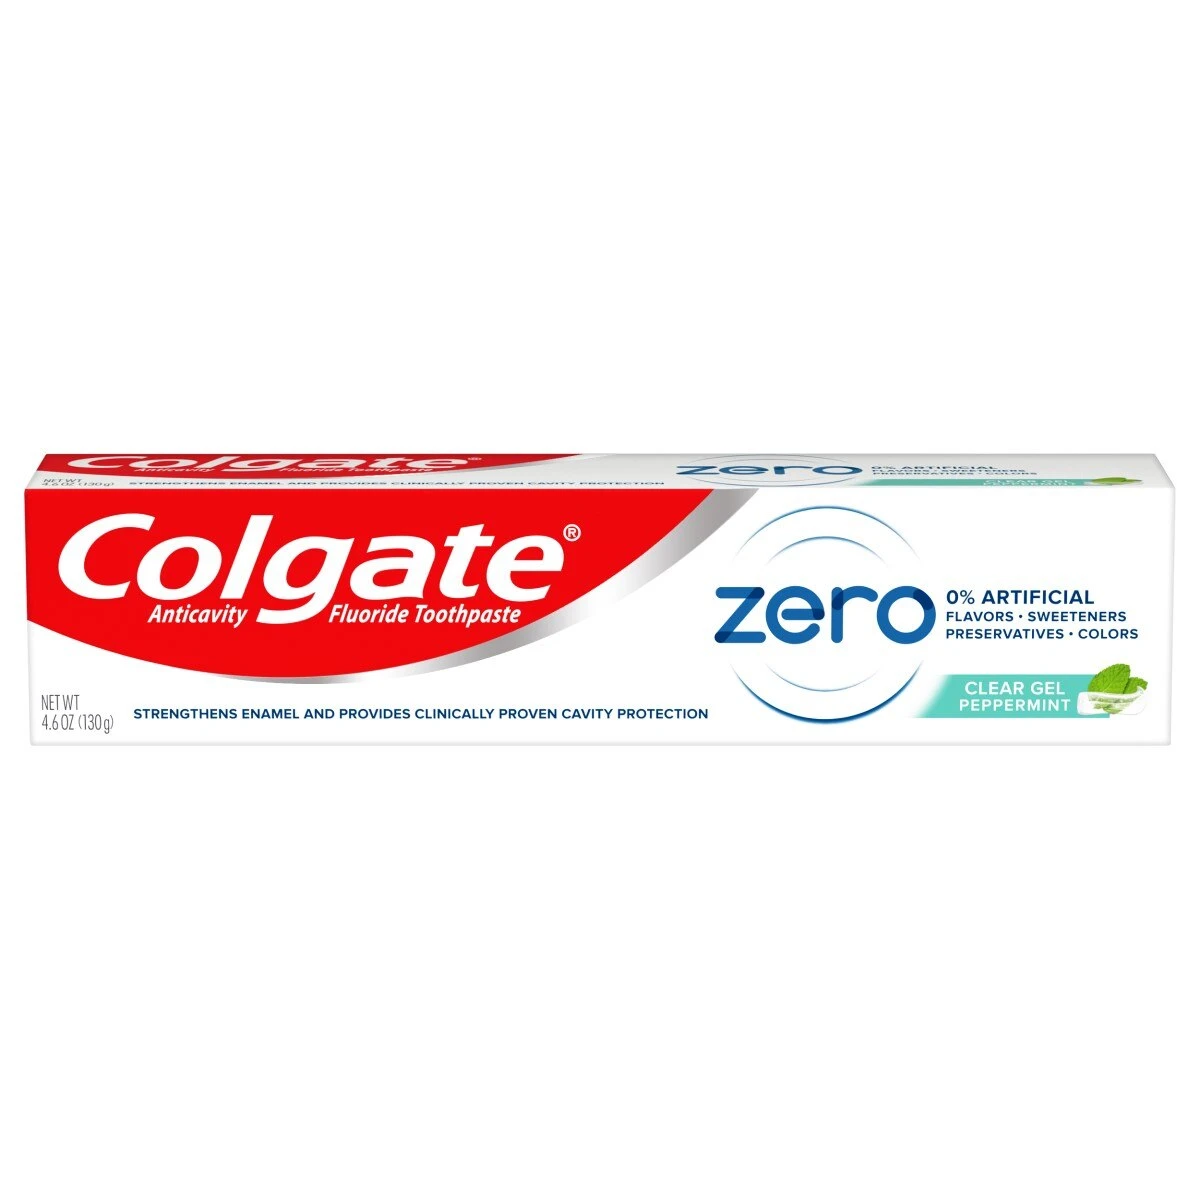 Colgate Zero Toothpaste with Fluoride Natural Peppermint Flavor 4.6oz